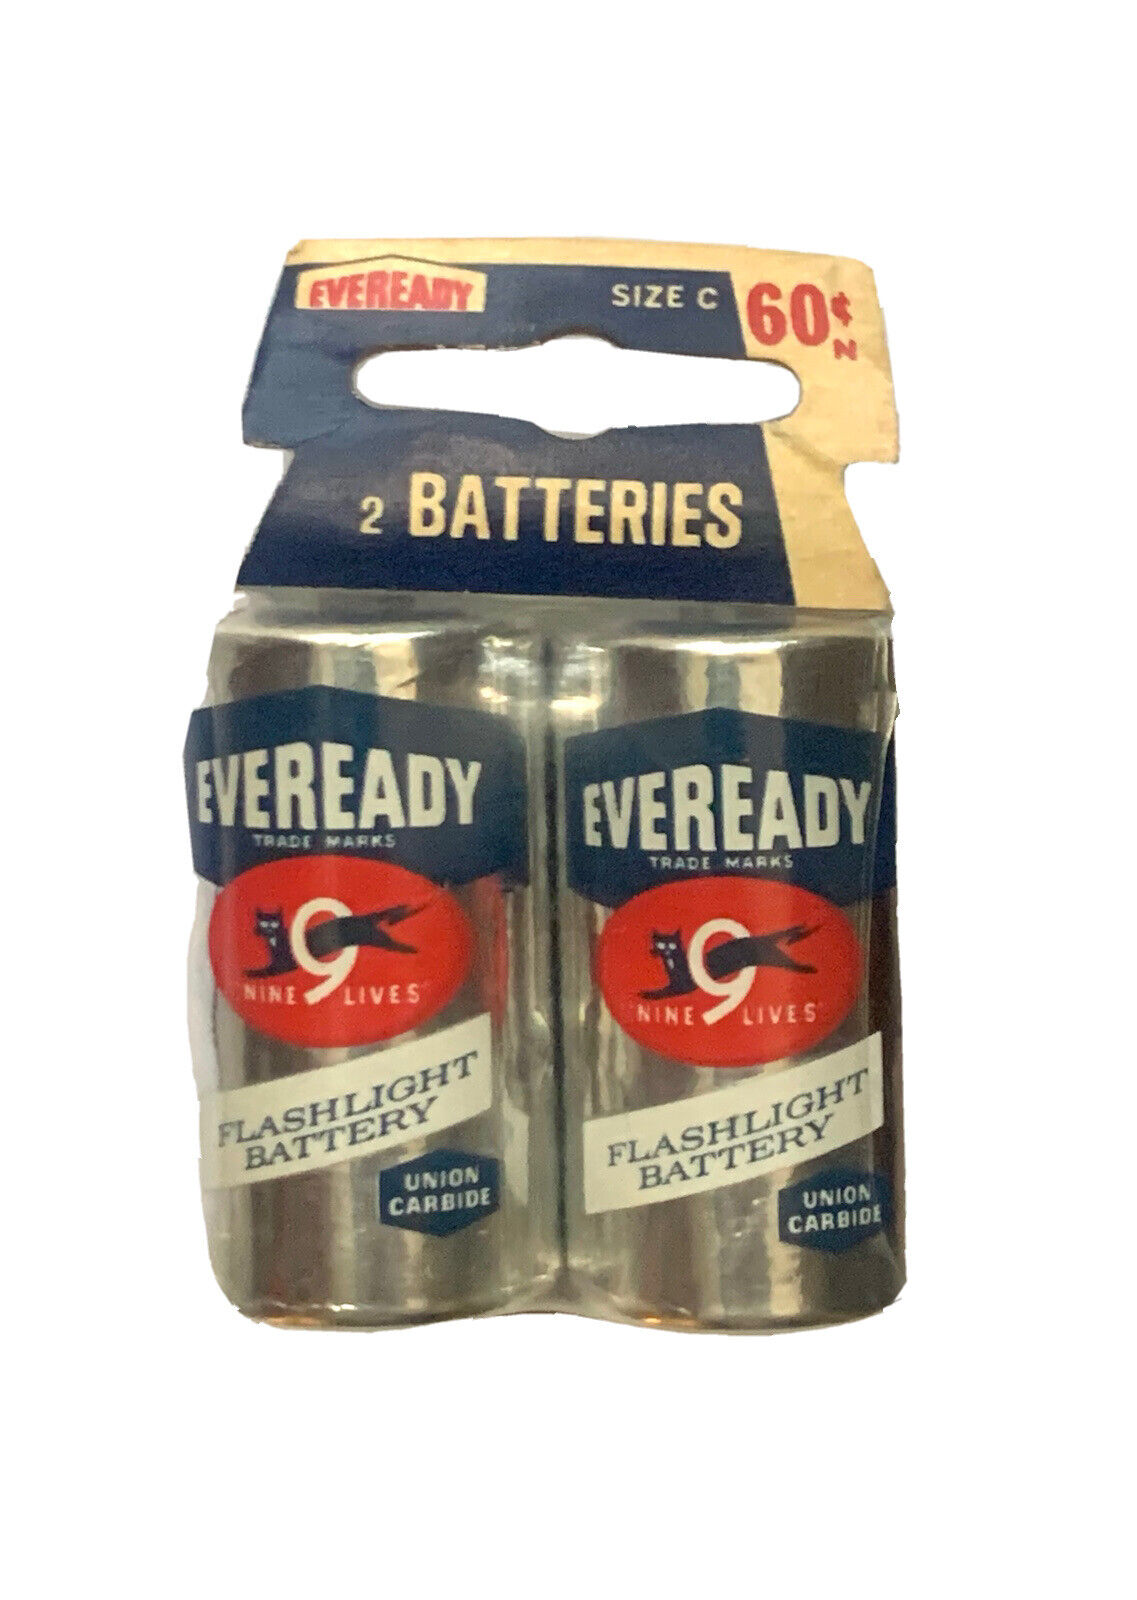 1950s - 1960s Eveready Batteries Size C In Sealed Package. Union Carbide N.Y.